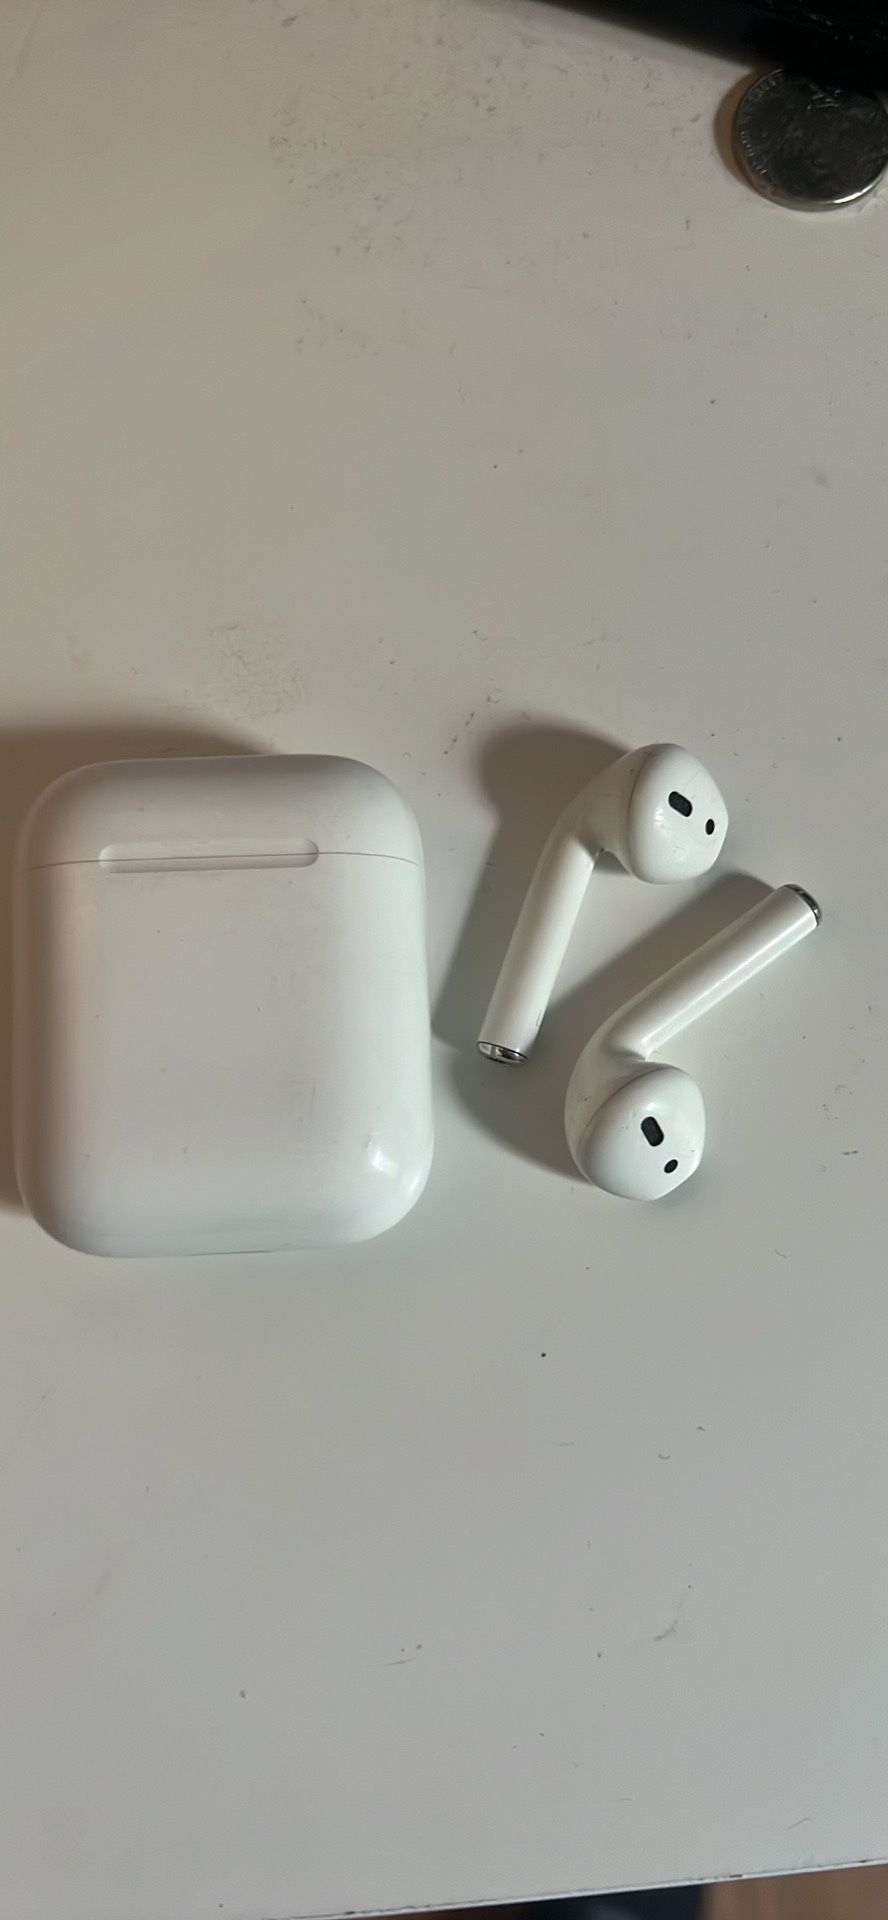 Apple Airpods first gen ( air pods + charging case)